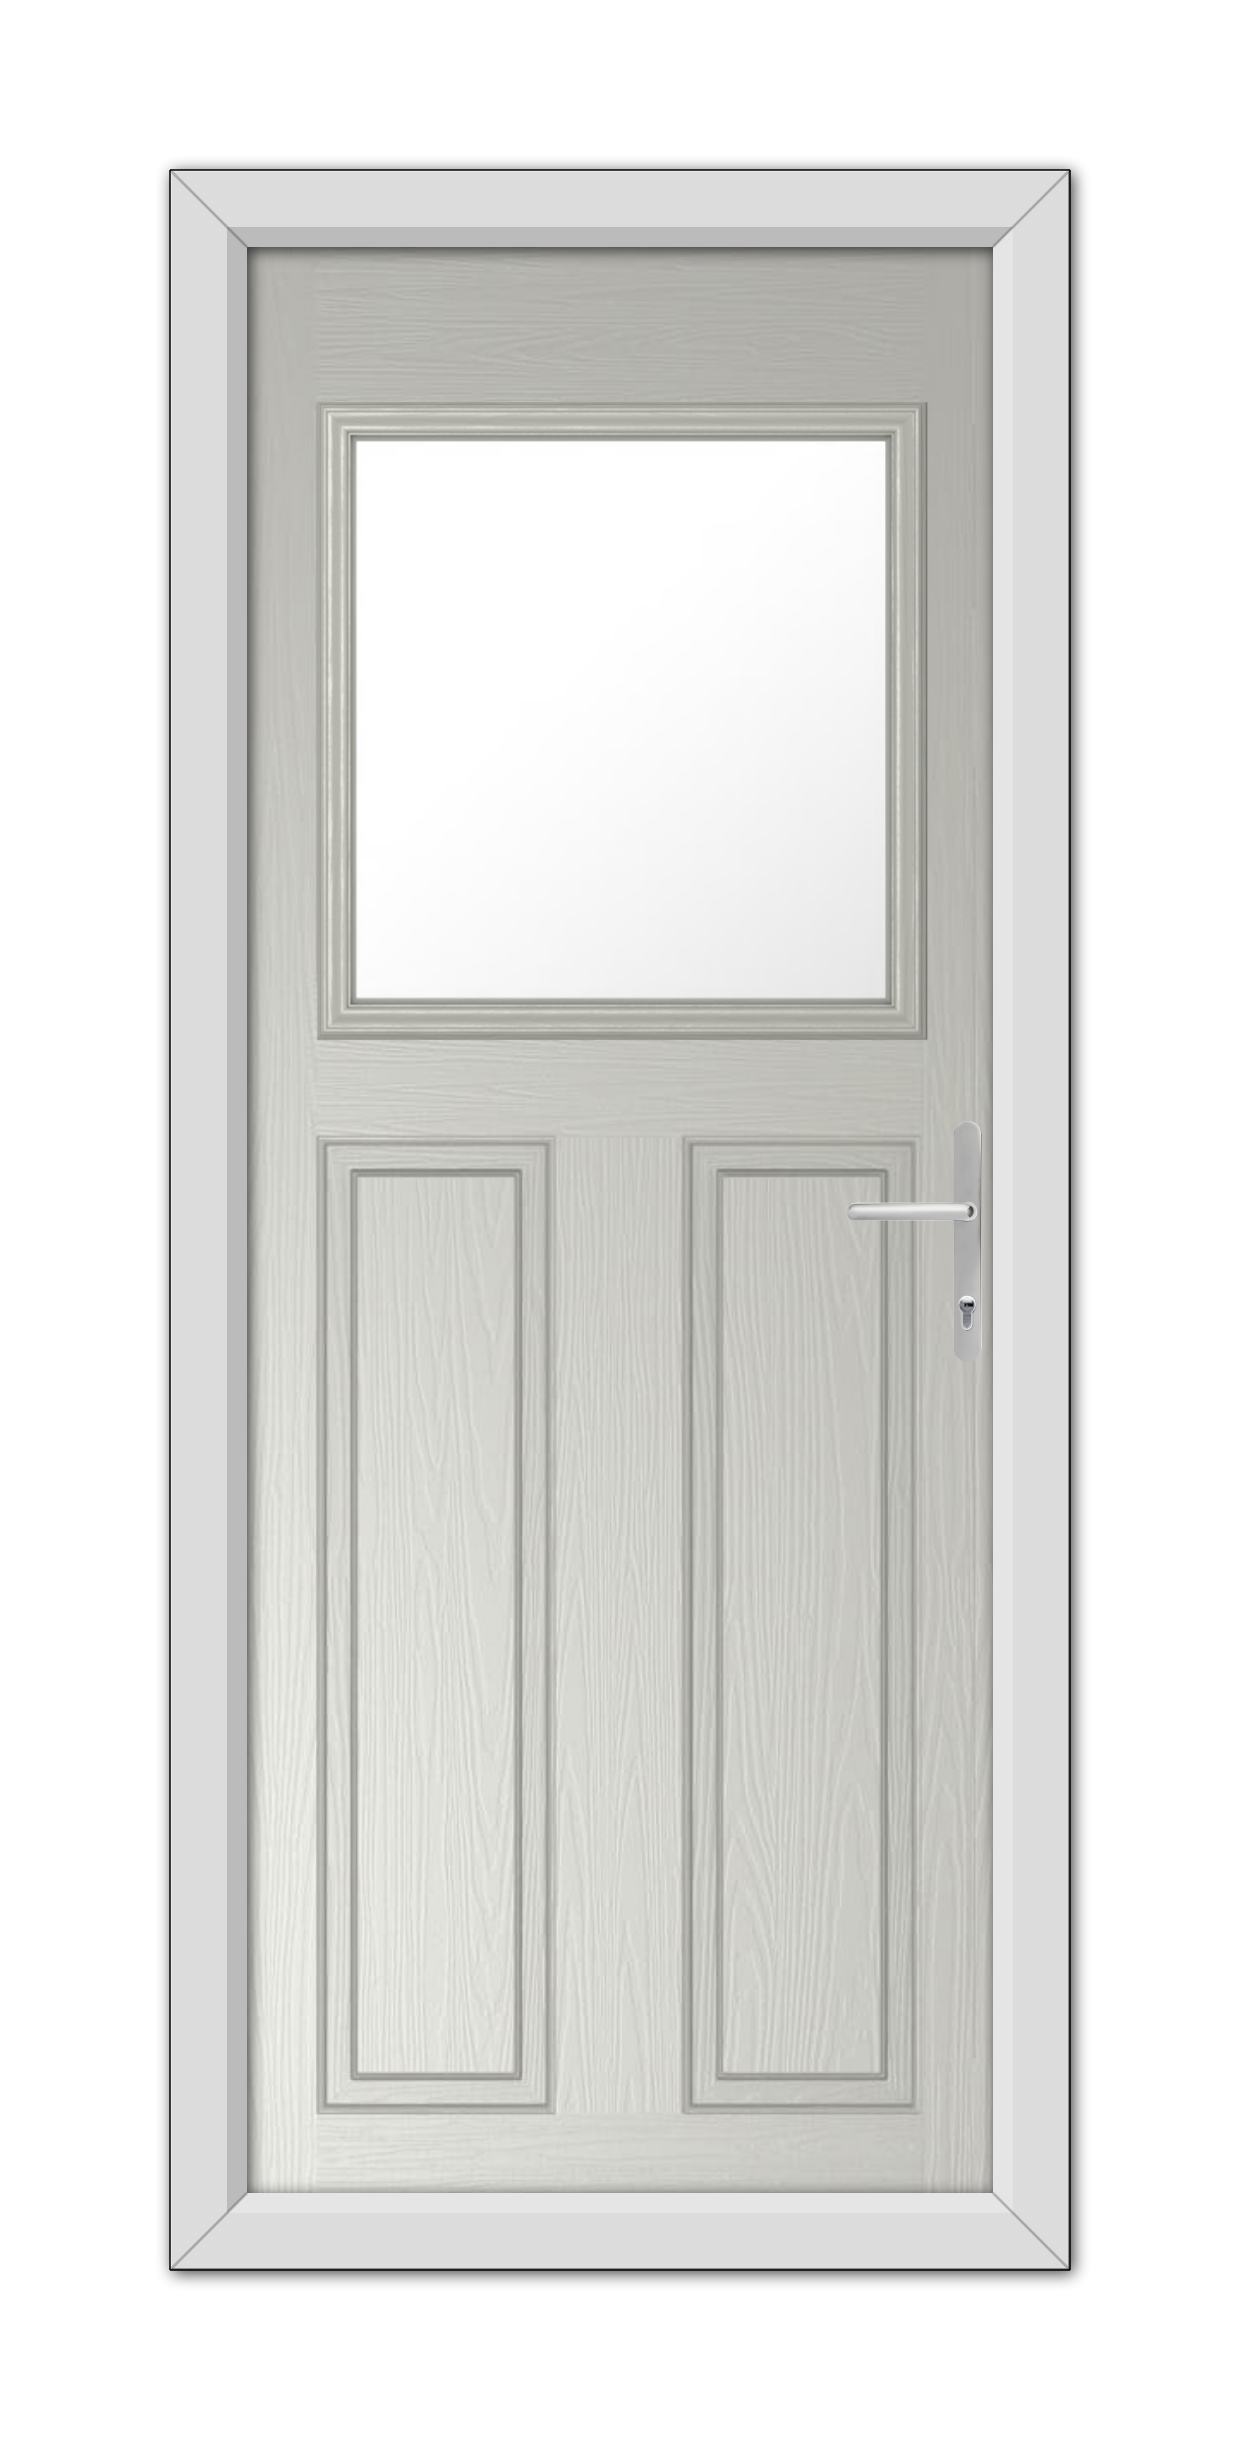 A Agate Grey Axwell Composite Door 48mm Timber Core equipped with a small square window near the top and a stainless steel handle on the right side.